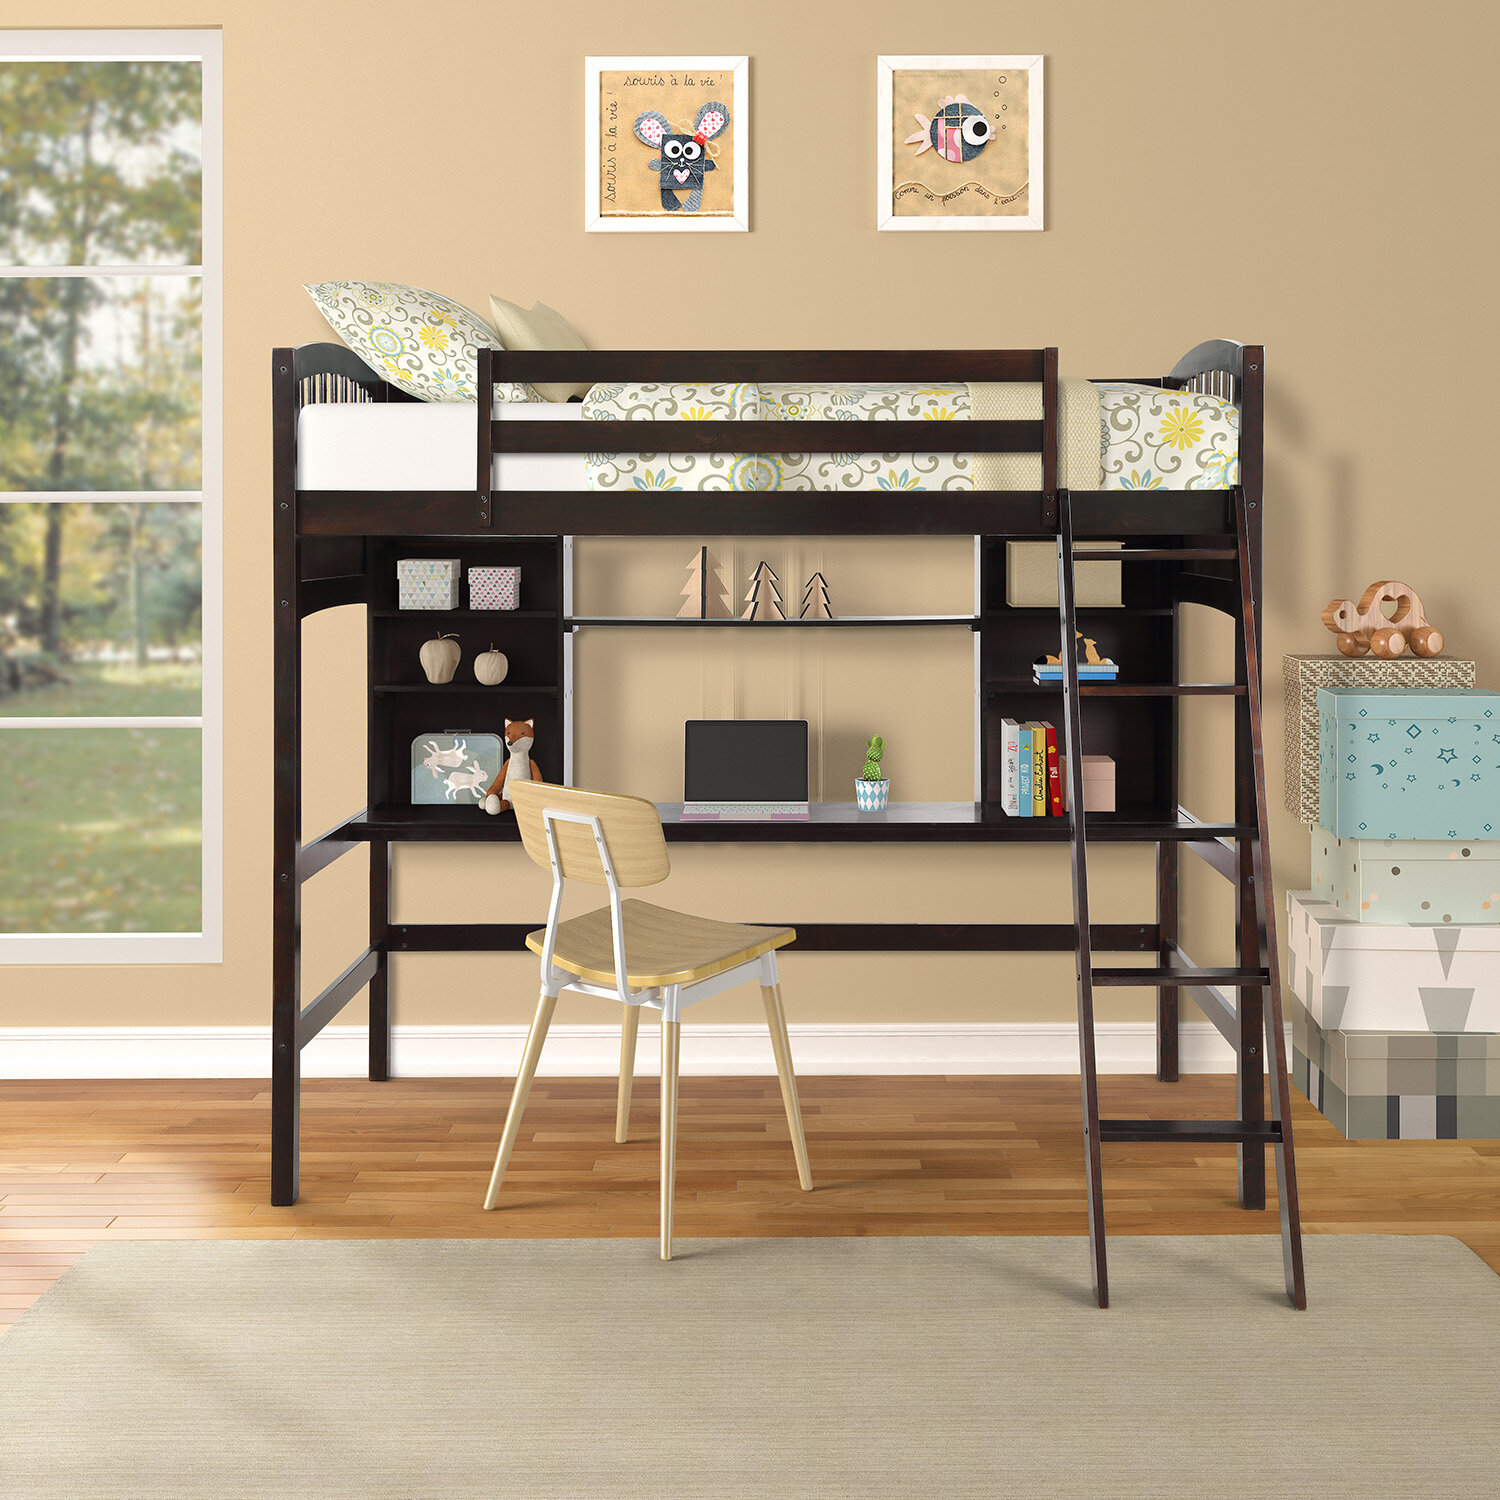 Twin Loft Bed With Desk